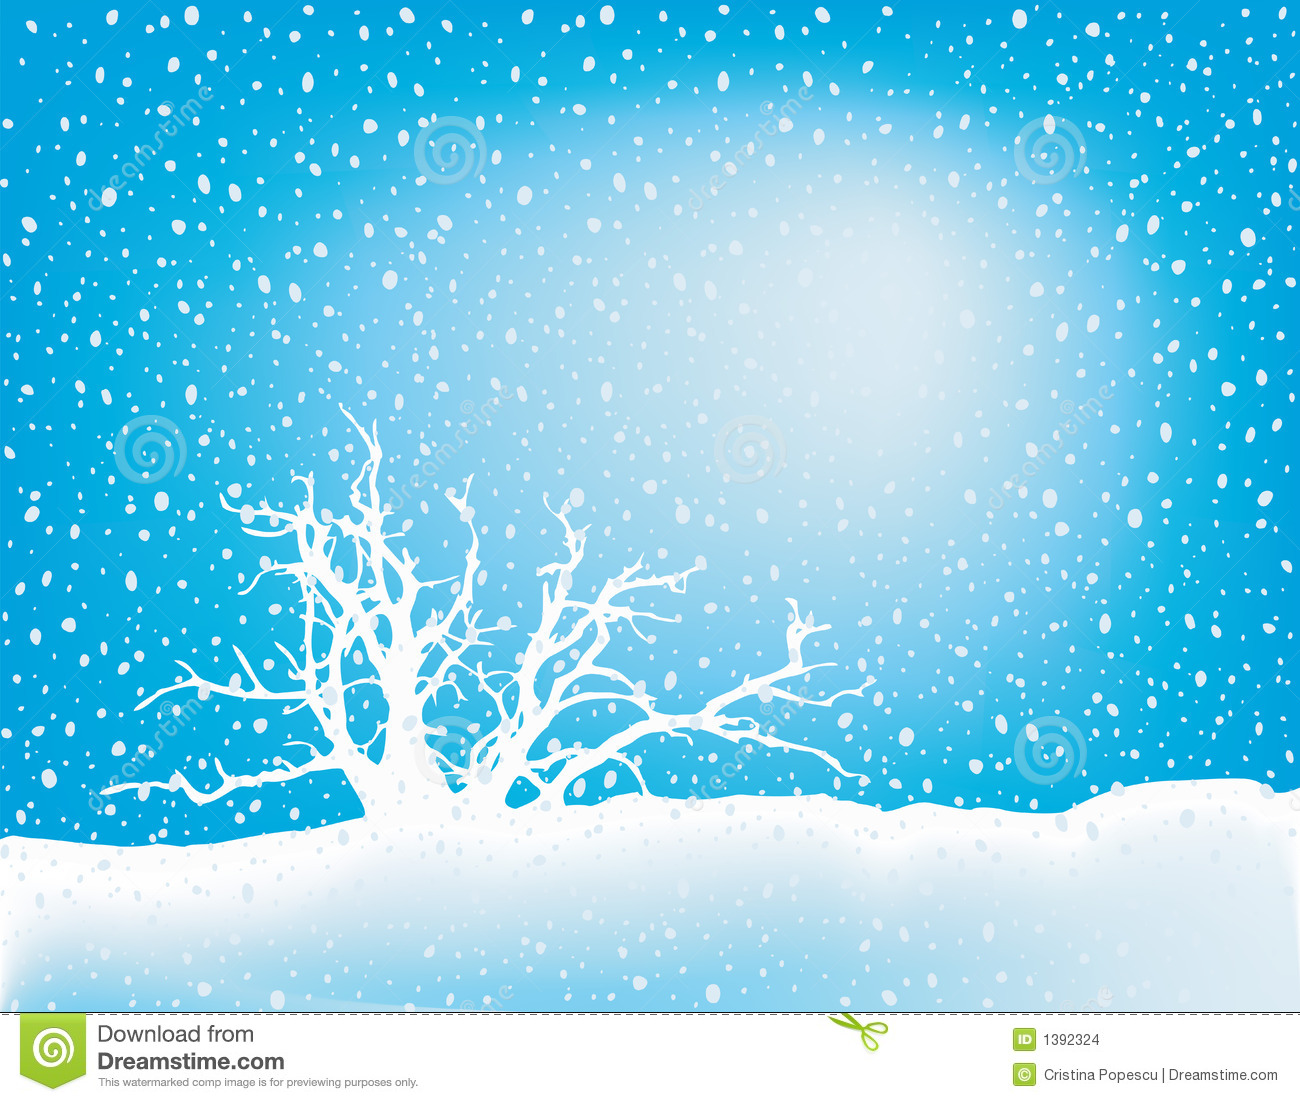 Stock Images  Snow Falling  Image  1392324